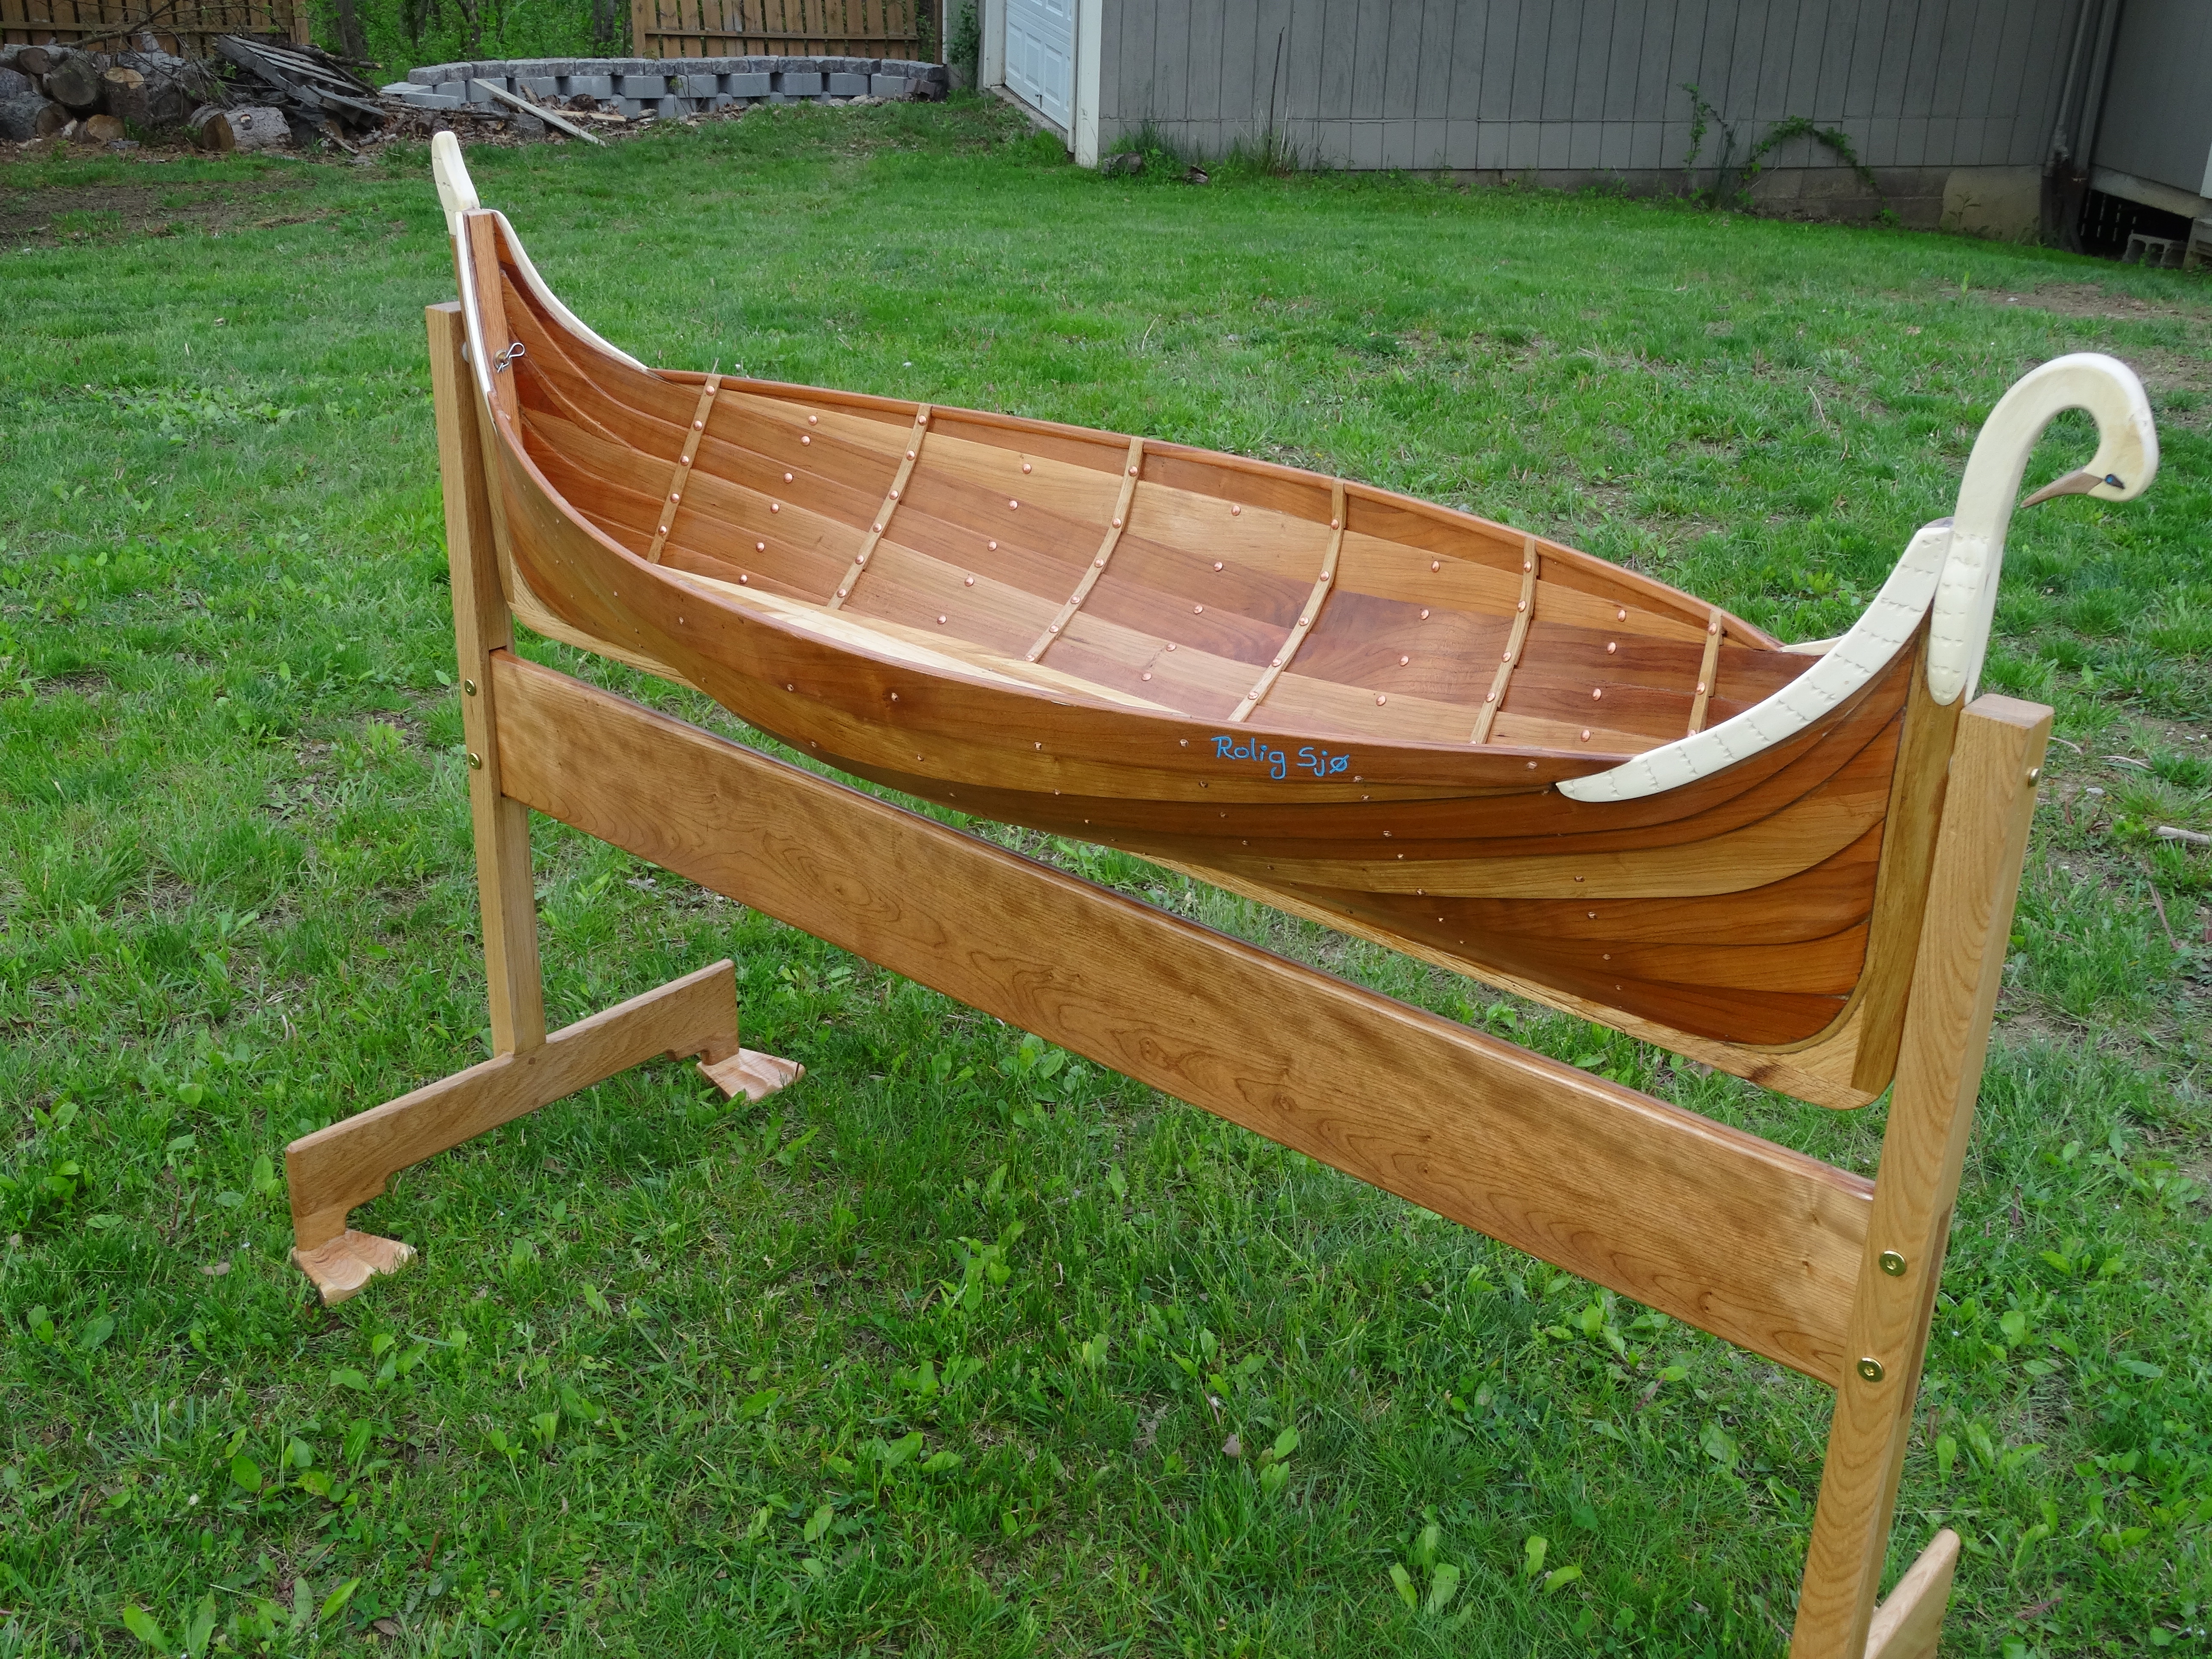 cradle boats and more georgetown wooden boat show